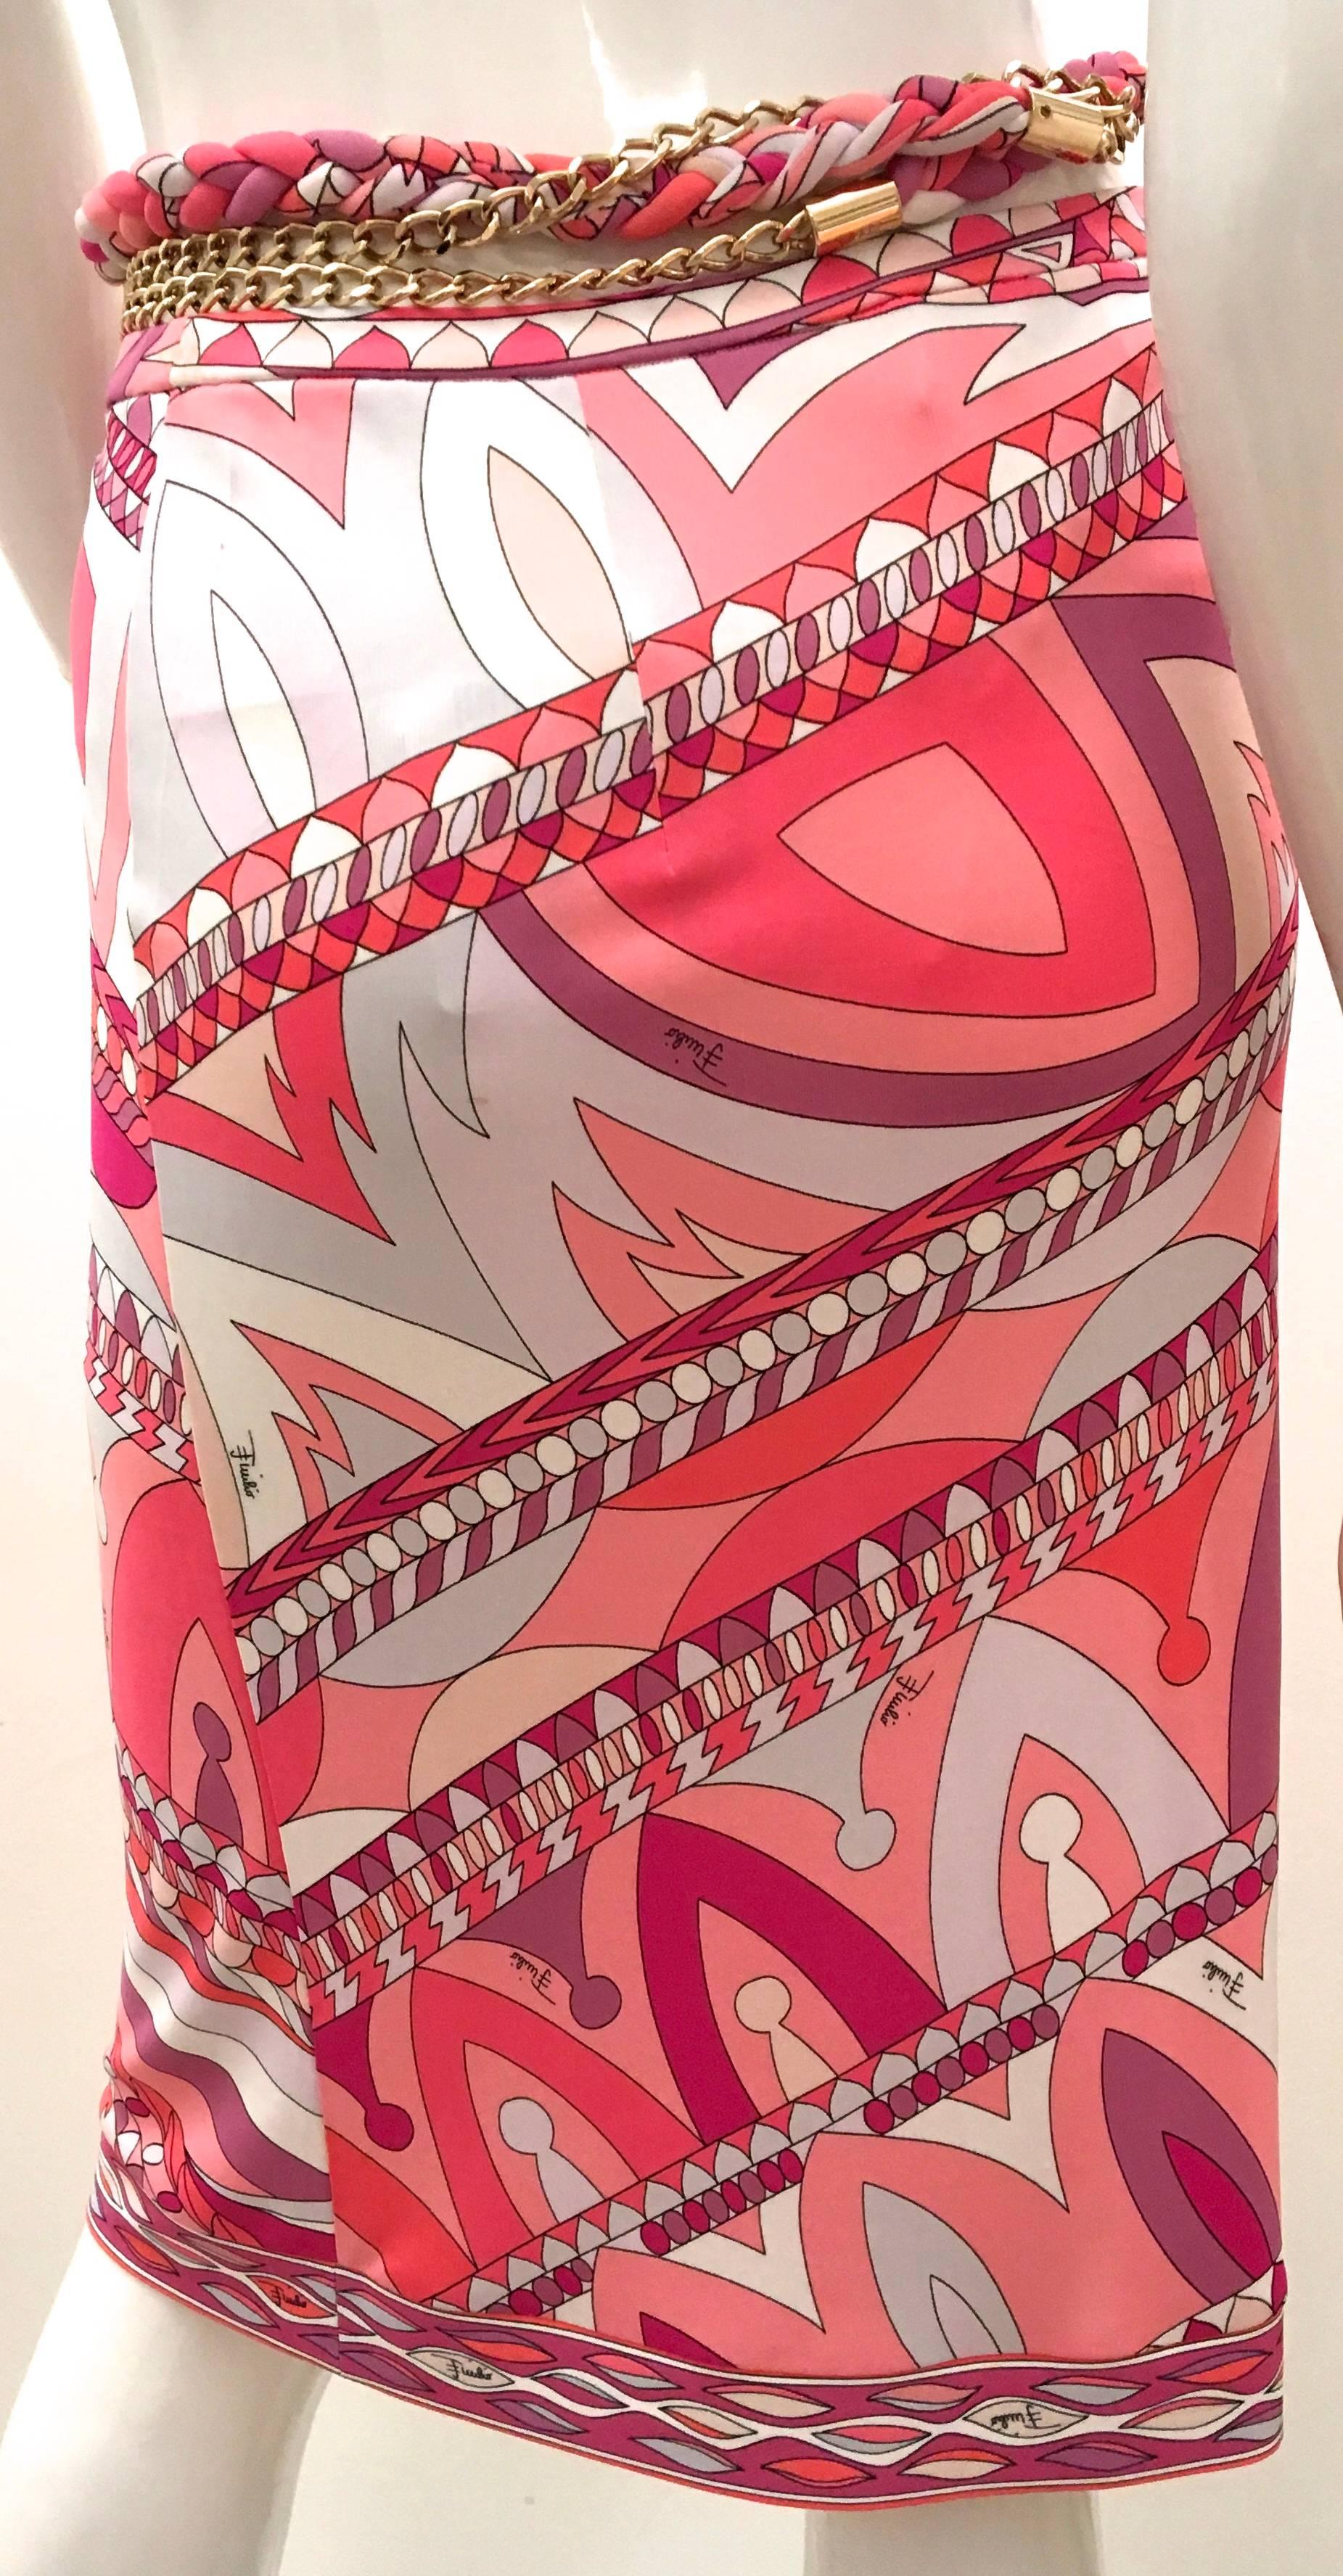 Presented here is a beautiful new Emilio Pucci skirt. The size is your typical fabulous pattern which makes Emilio Pucci so famous. Various geometric shapes in shades of fuchsia, pink, orange, and white. The skirt is a USA size 12, a UK size 14, a